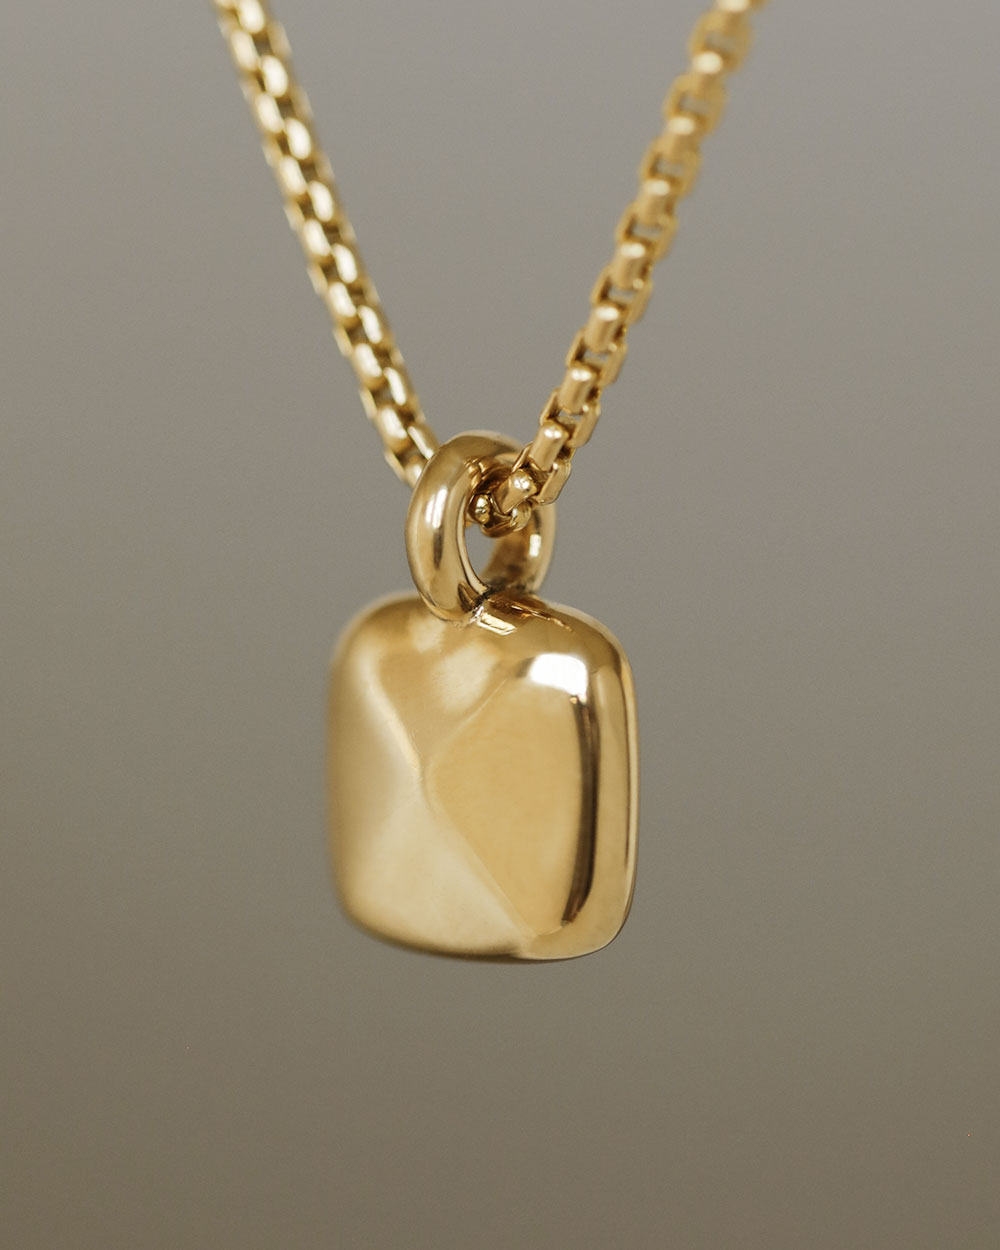 Solid 18k yellow gold pillow puff pendant hanging from a solid 14k yellow gold box chain. Pillow Pendant by George Rings.